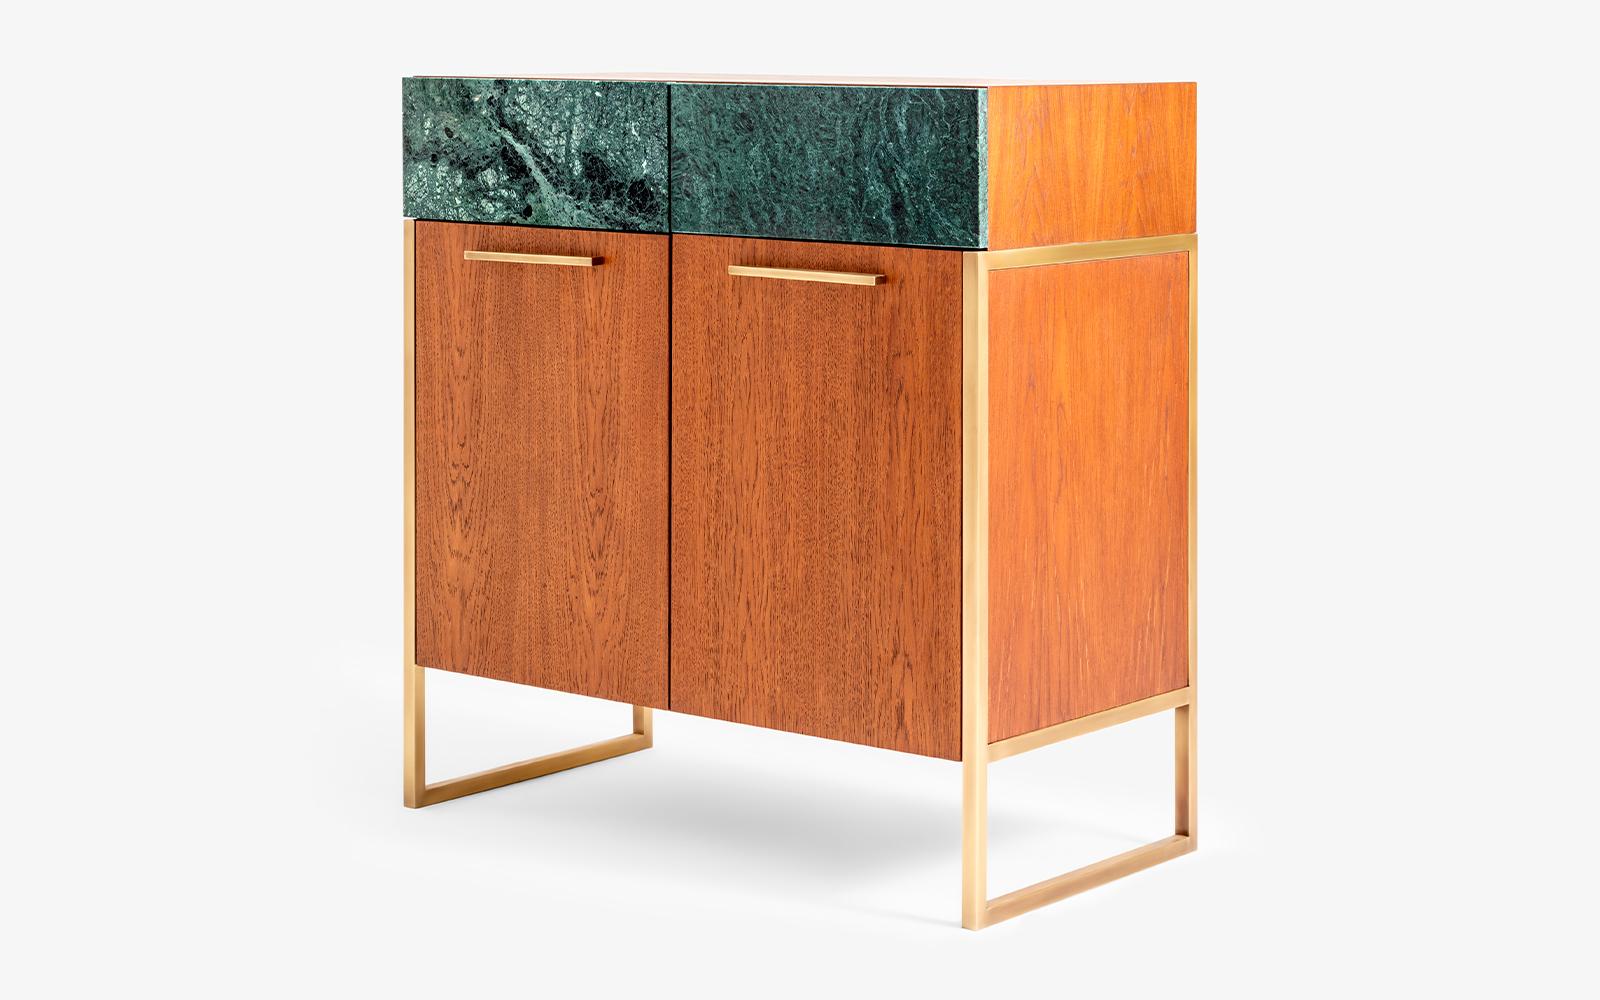 Famed Modular Console by Lagu
Designed by Ufuk Ceylan
Dimensions: W 84 x D 45 x H 90 cm
Materials: Brass, Marble, Oak, Wood.

Offering the most elegant combination of first grade oak plated and rainforest marble, Famed console produces a solution